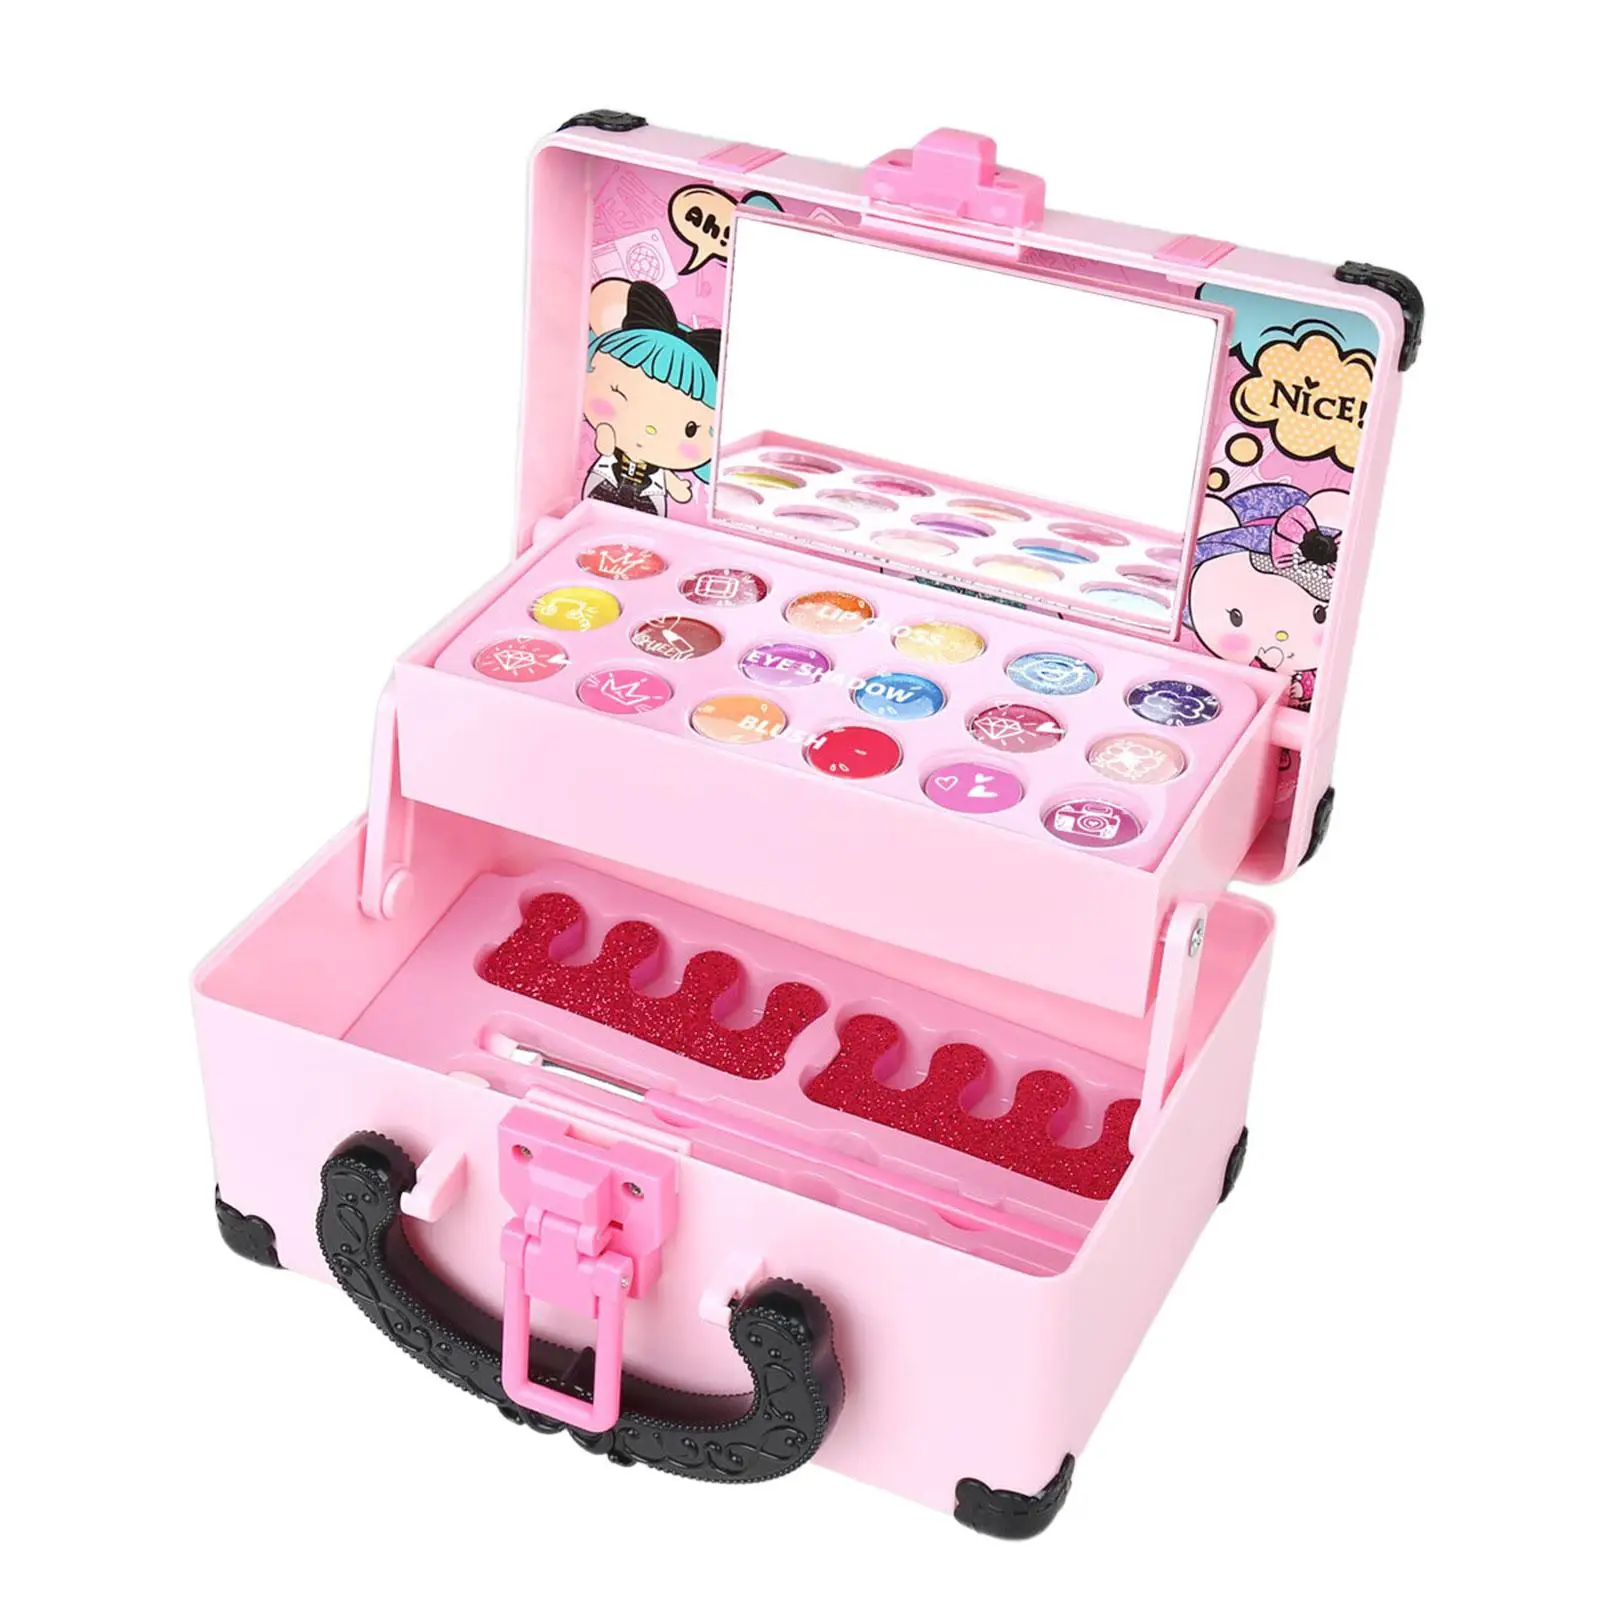 Cosmetics Makeup Toy Set Dresser Toy Pretend Makeup Accessories Pretend Makeup Set for Children Toddlers Girls Birthday Gifts